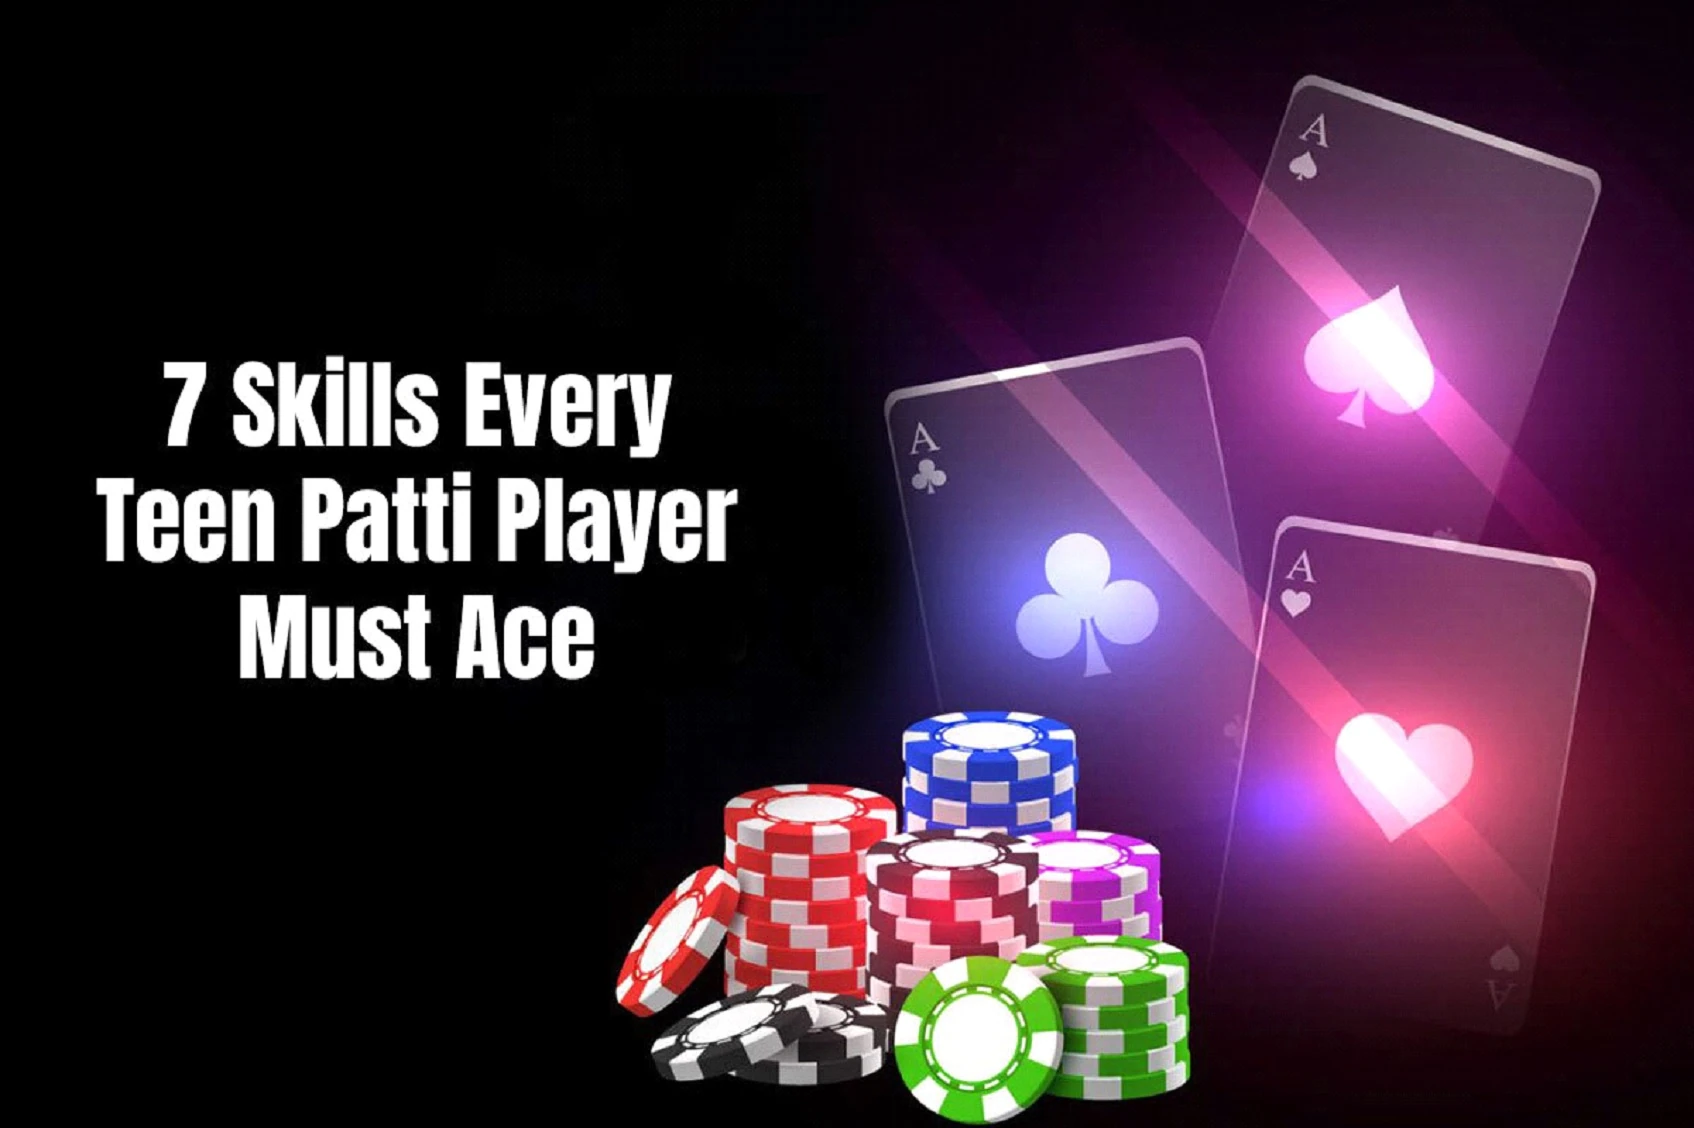 7 Skills Every Teen Patti Player Must Ace